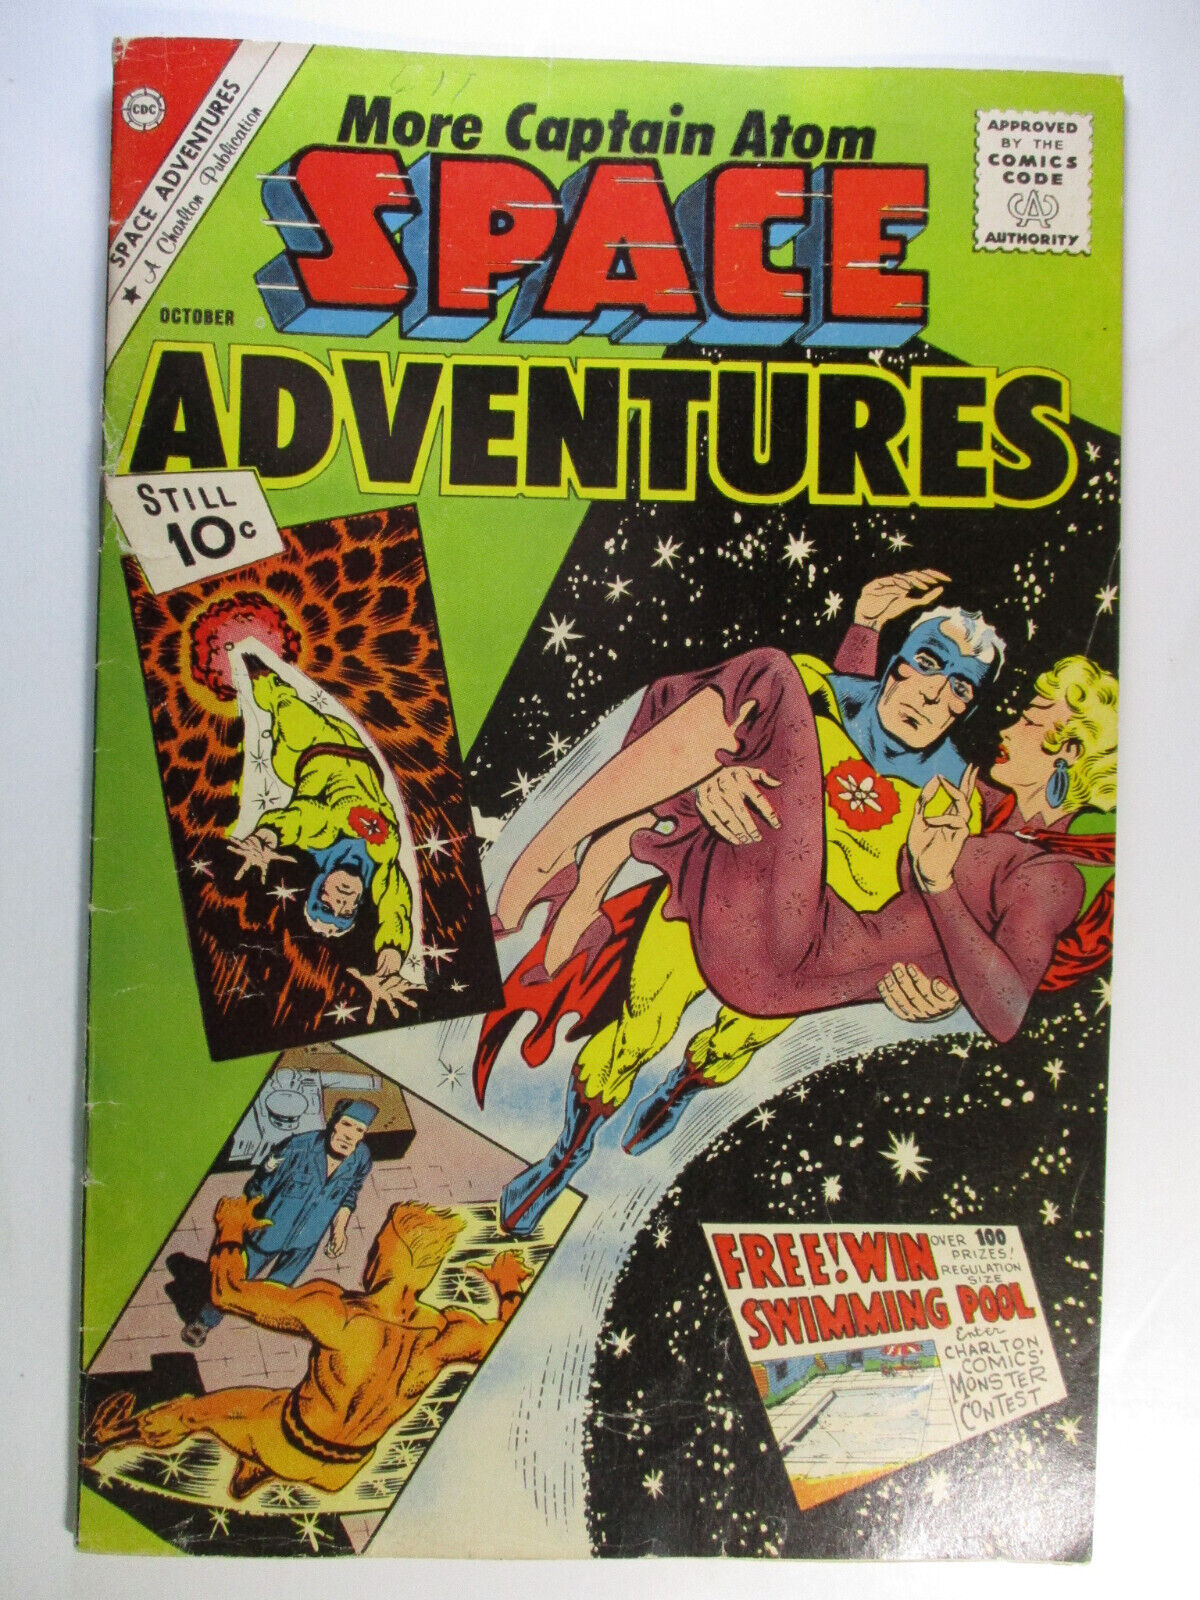 Space Adventures #42, Ditko Captain Atom, Charlton, VG/F, 5.0 (C), White Pages